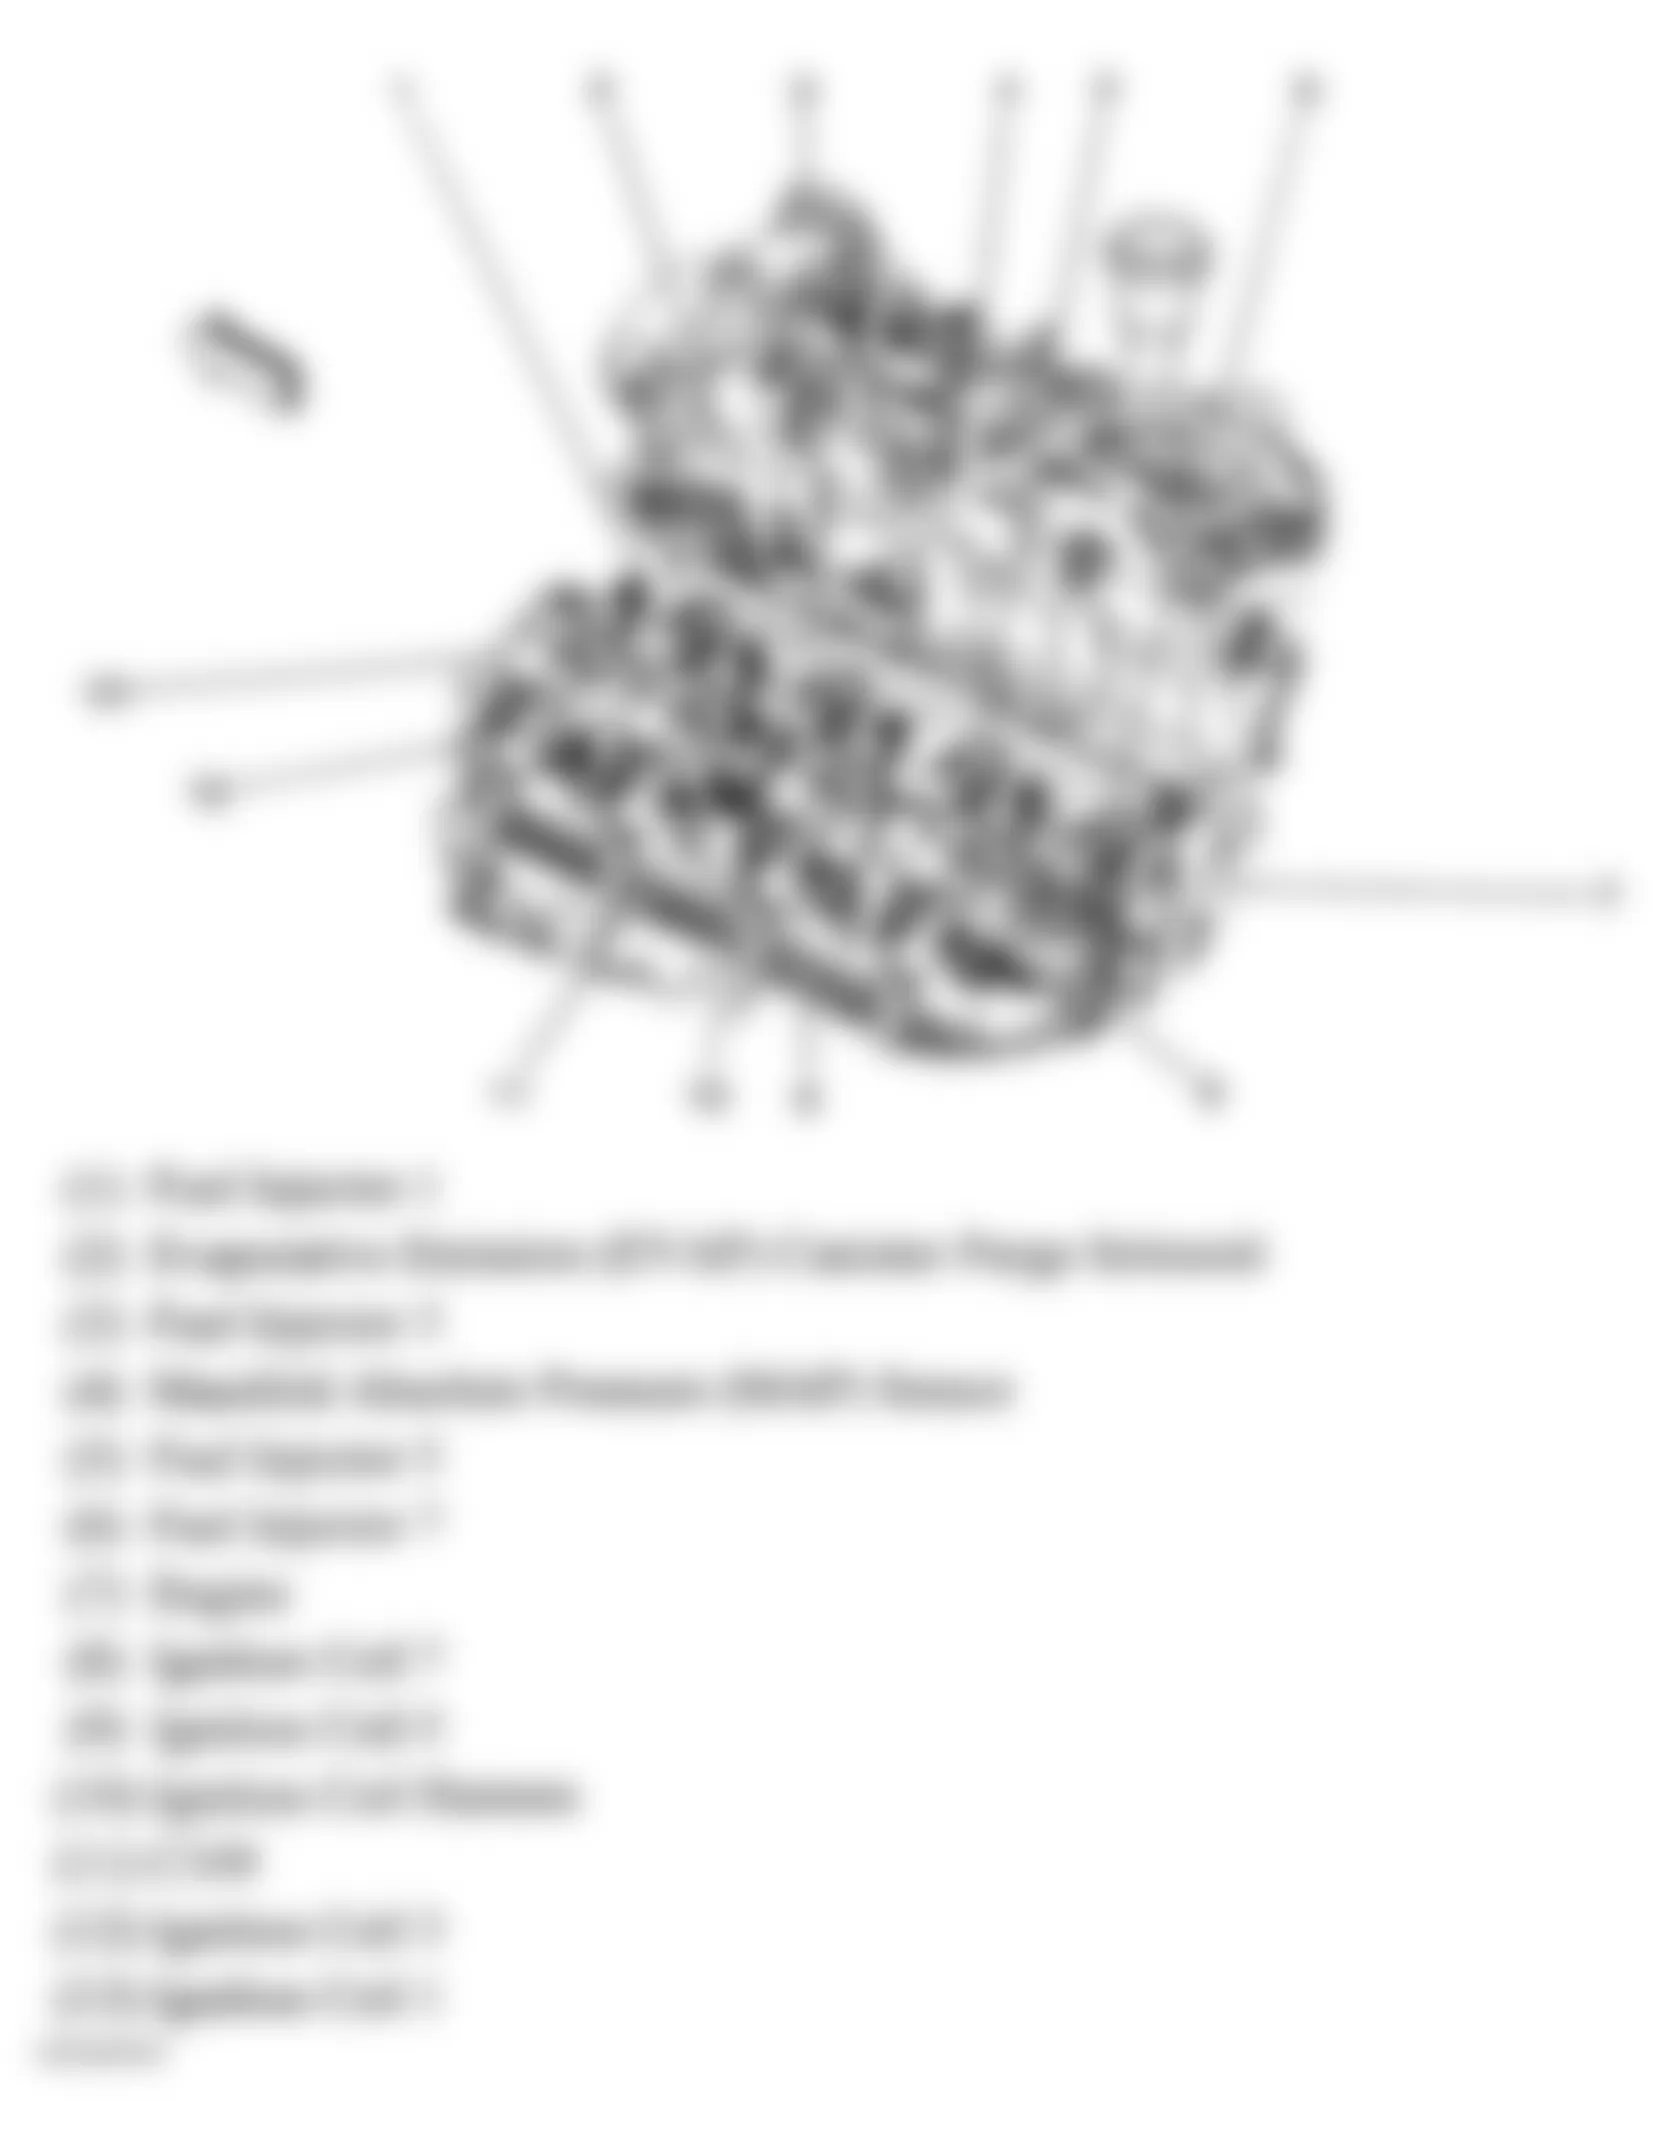 GMC Envoy XL 2005 - Component Locations -  Upper Left Side Of Engine (5.3L)